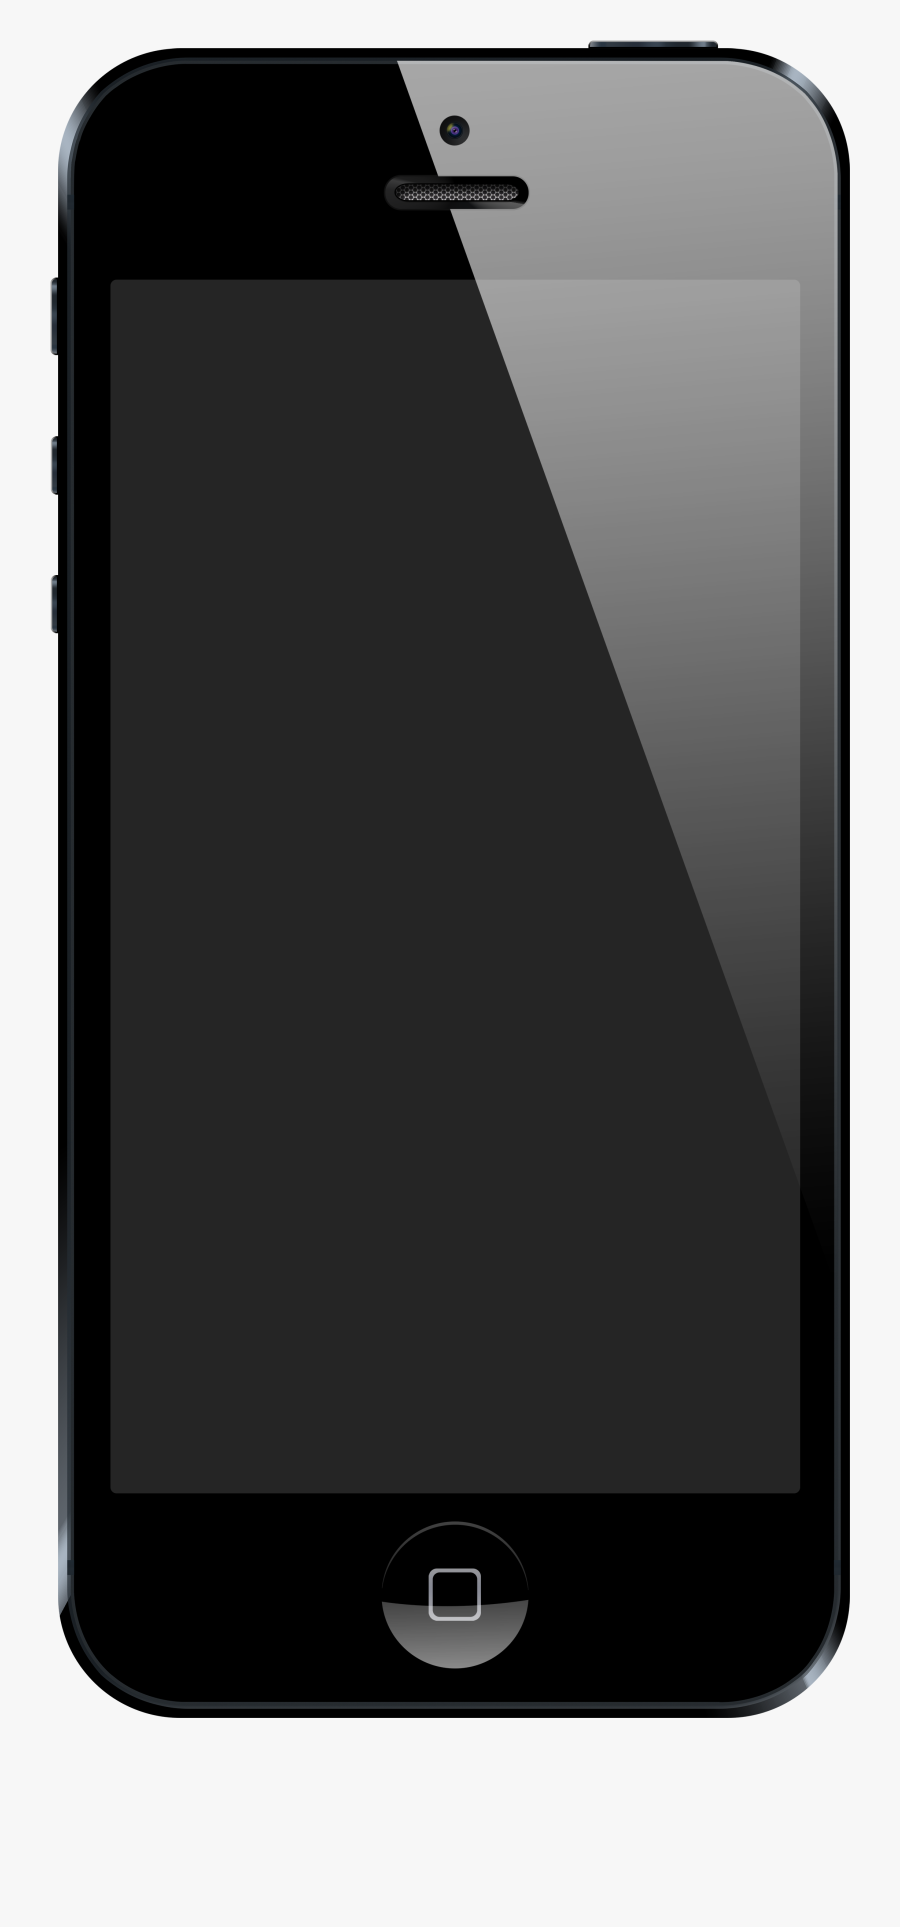 Iphone 5 - Wikipedia - Iphone 5 Png, Transparent Clipart